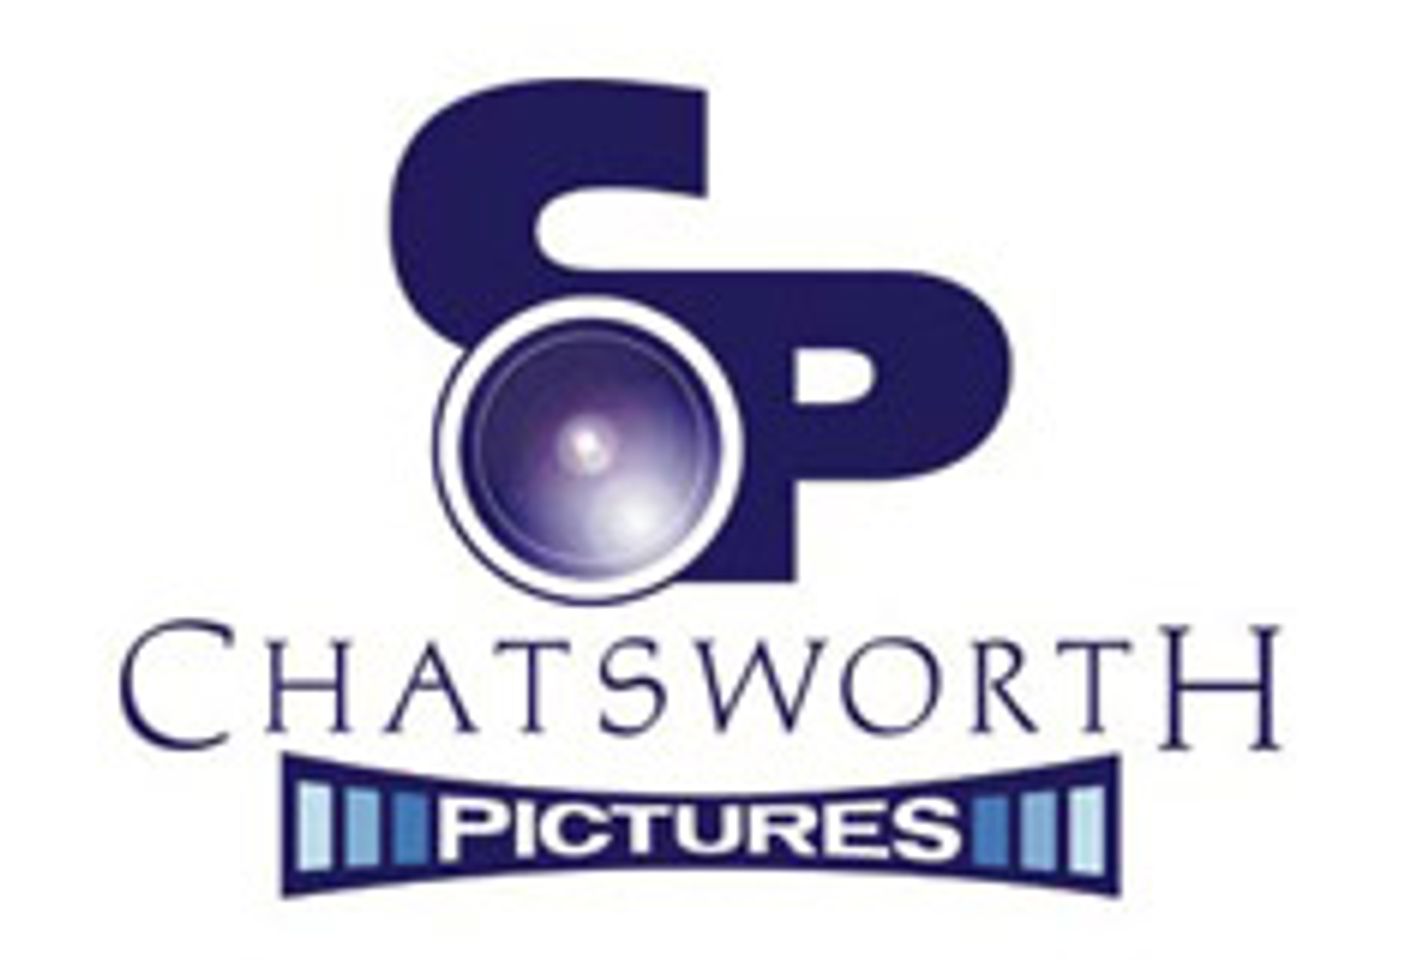 Chatsworth Pictures Rolls Out First Feature